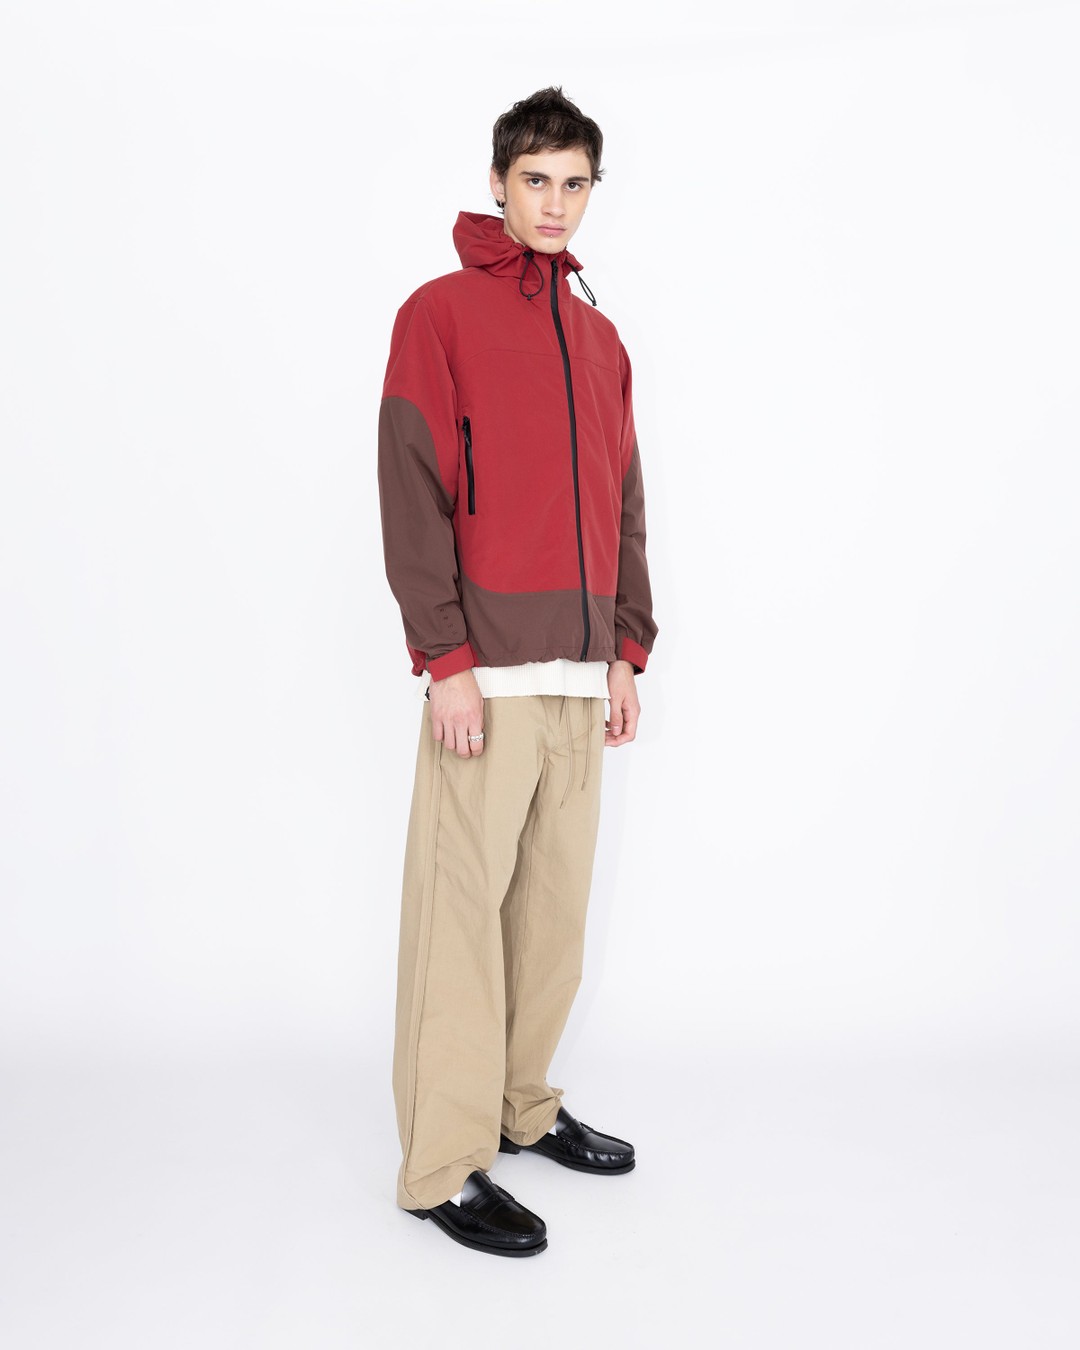 Highsnobiety HS05 – 3 Layer Taped Nylon Jacket Ruby - Outerwear - Red - Image 4